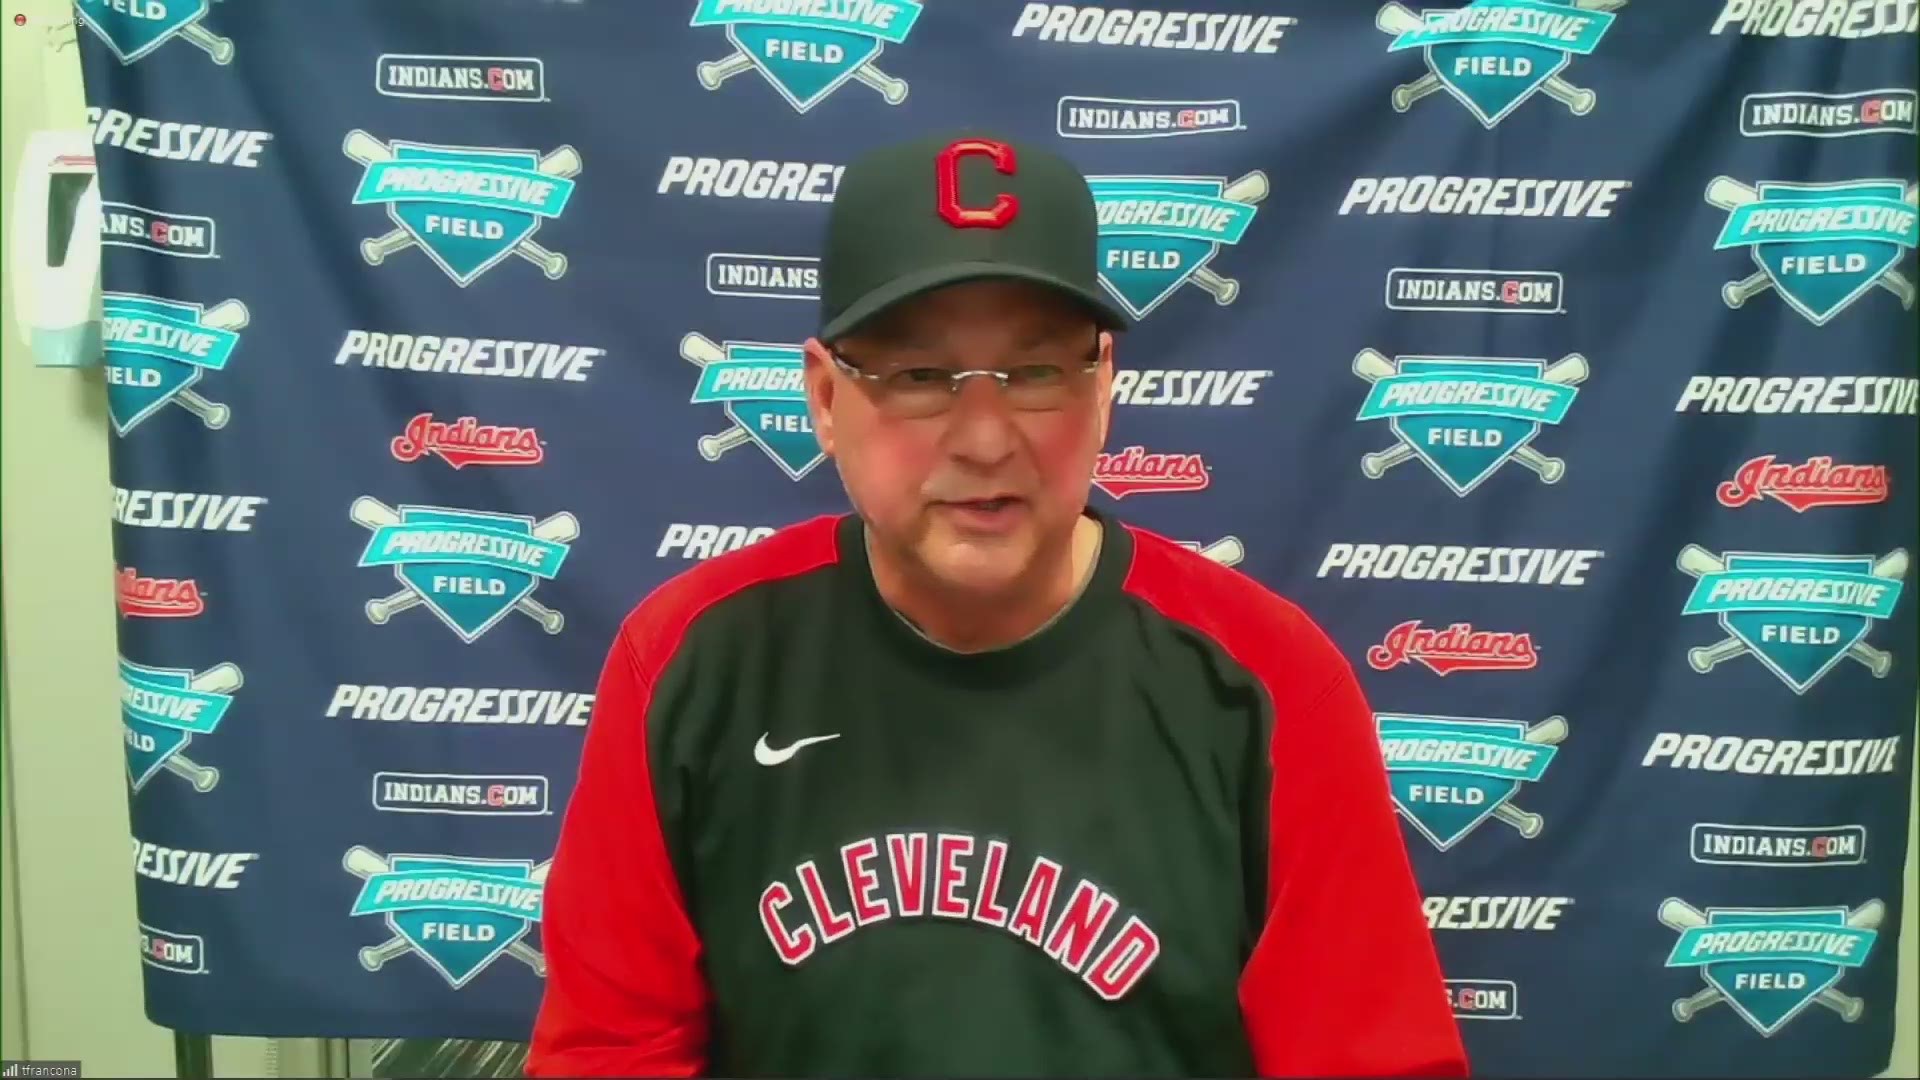 "I confronted my father, Chris Antonetti, and others with the Cleveland Indians. I wanted to know why they didn't say anything to me when the Mets hired Callaway."